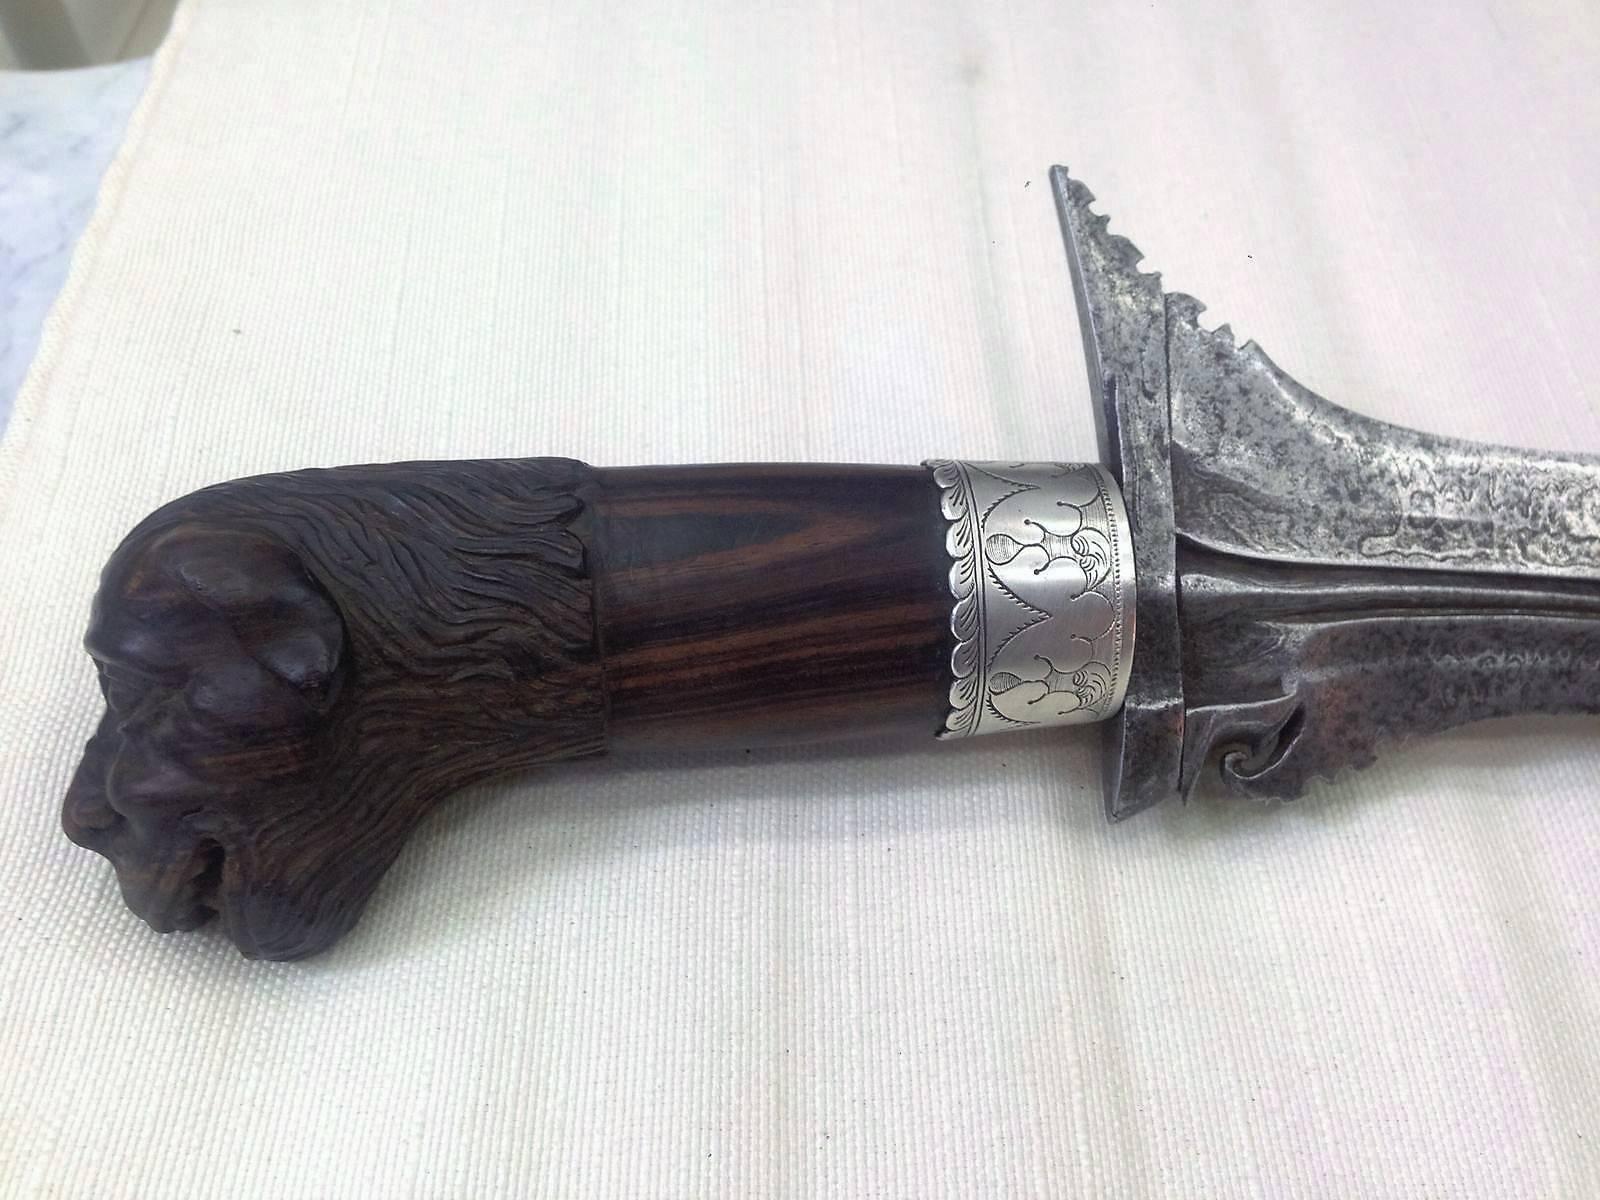 19th century sterling silver Malaysian Dagger.
Original carved mahogany wood handle.
Sterting silver carved crown.
Damascene steel.

The kris is an asymmetrical dagger with distinctive blade-patterning achieved through alternating laminations of